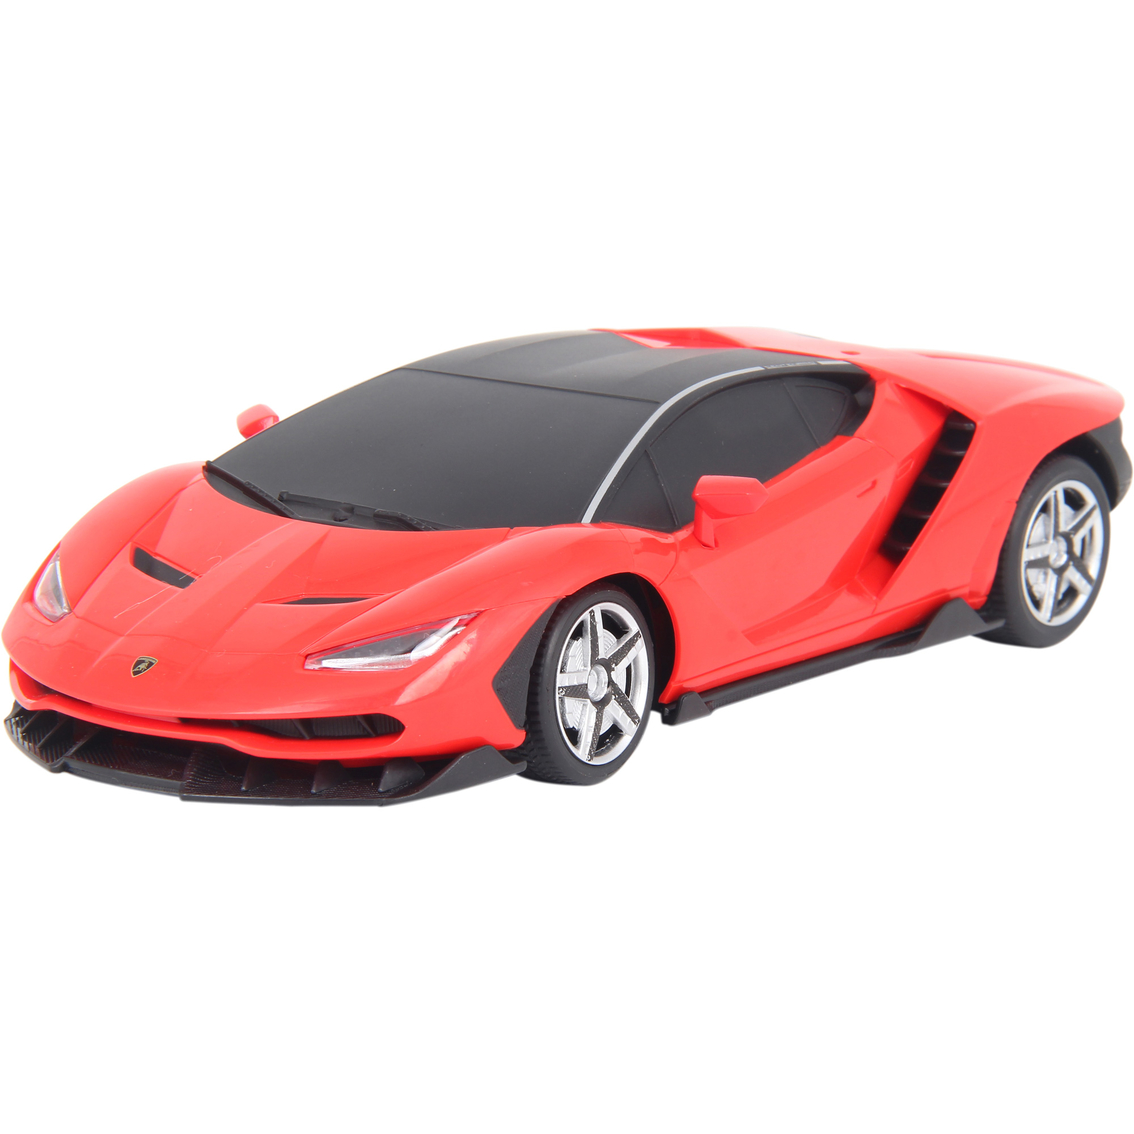 Braha 1:24 Scale Licensed RC Car